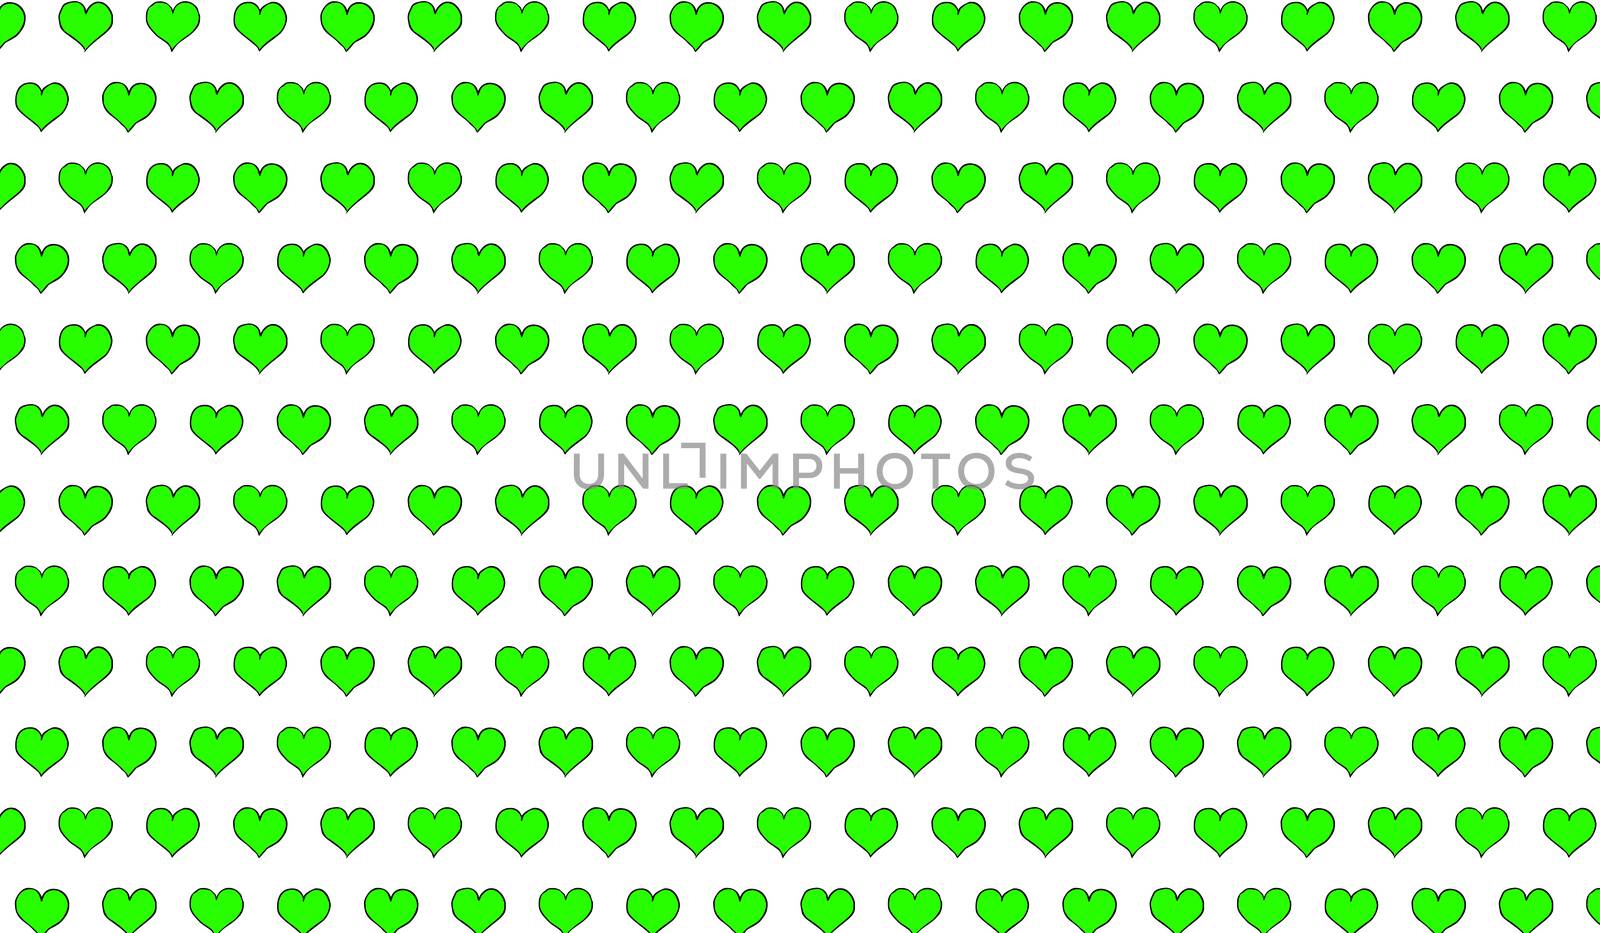 2d green pattern of cartoon hearts on isolated background by Andreajk3